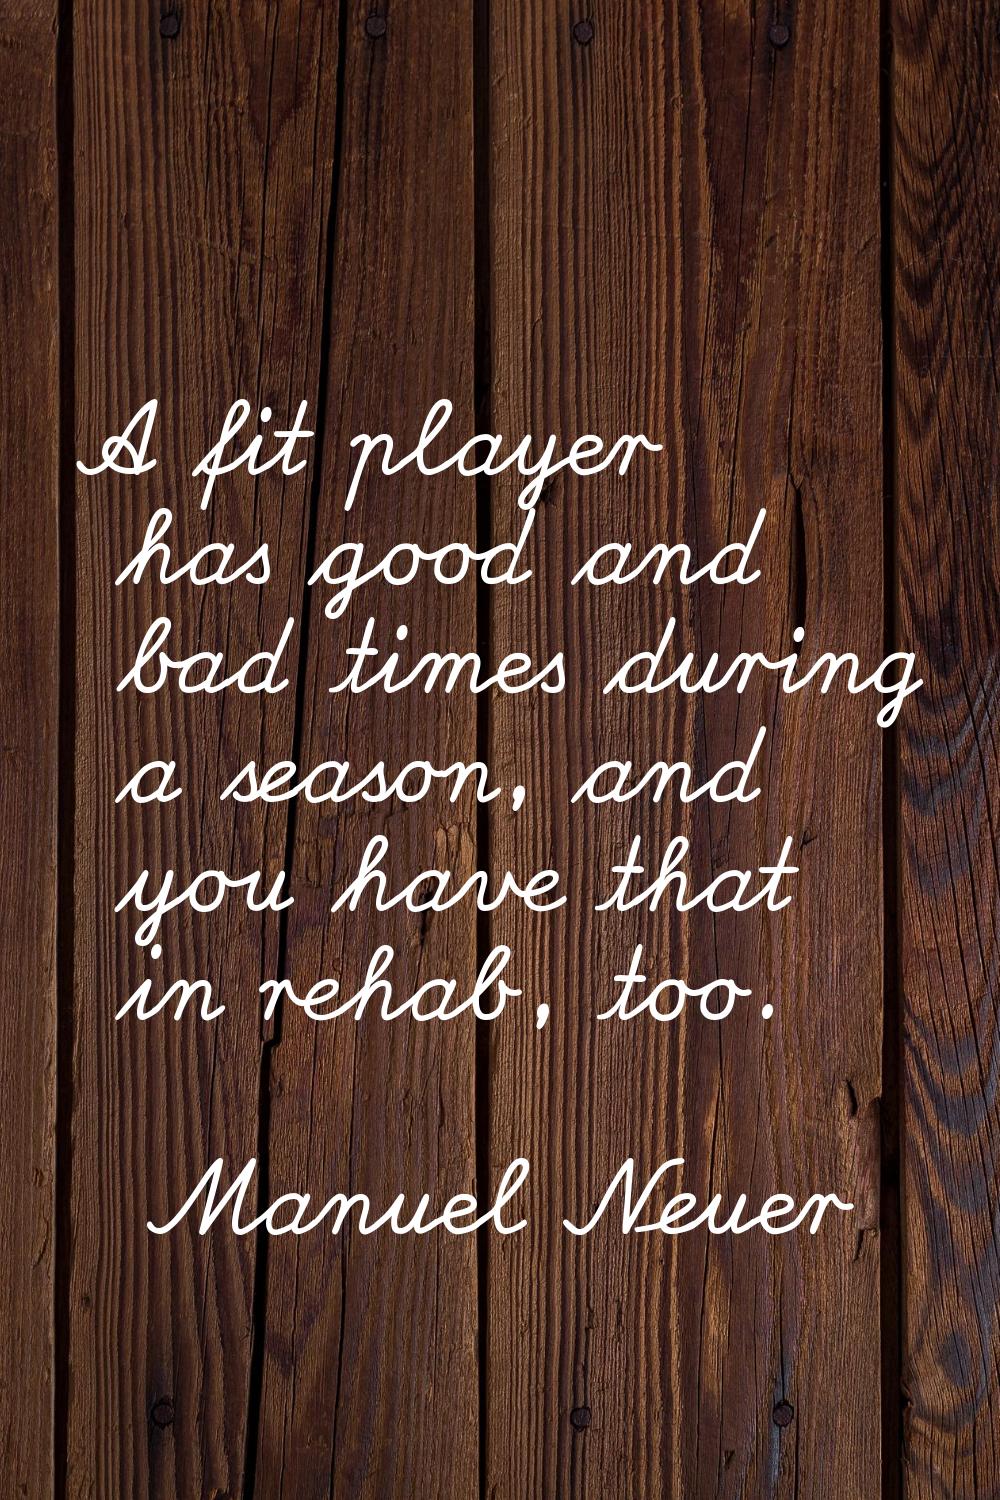 A fit player has good and bad times during a season, and you have that in rehab, too.